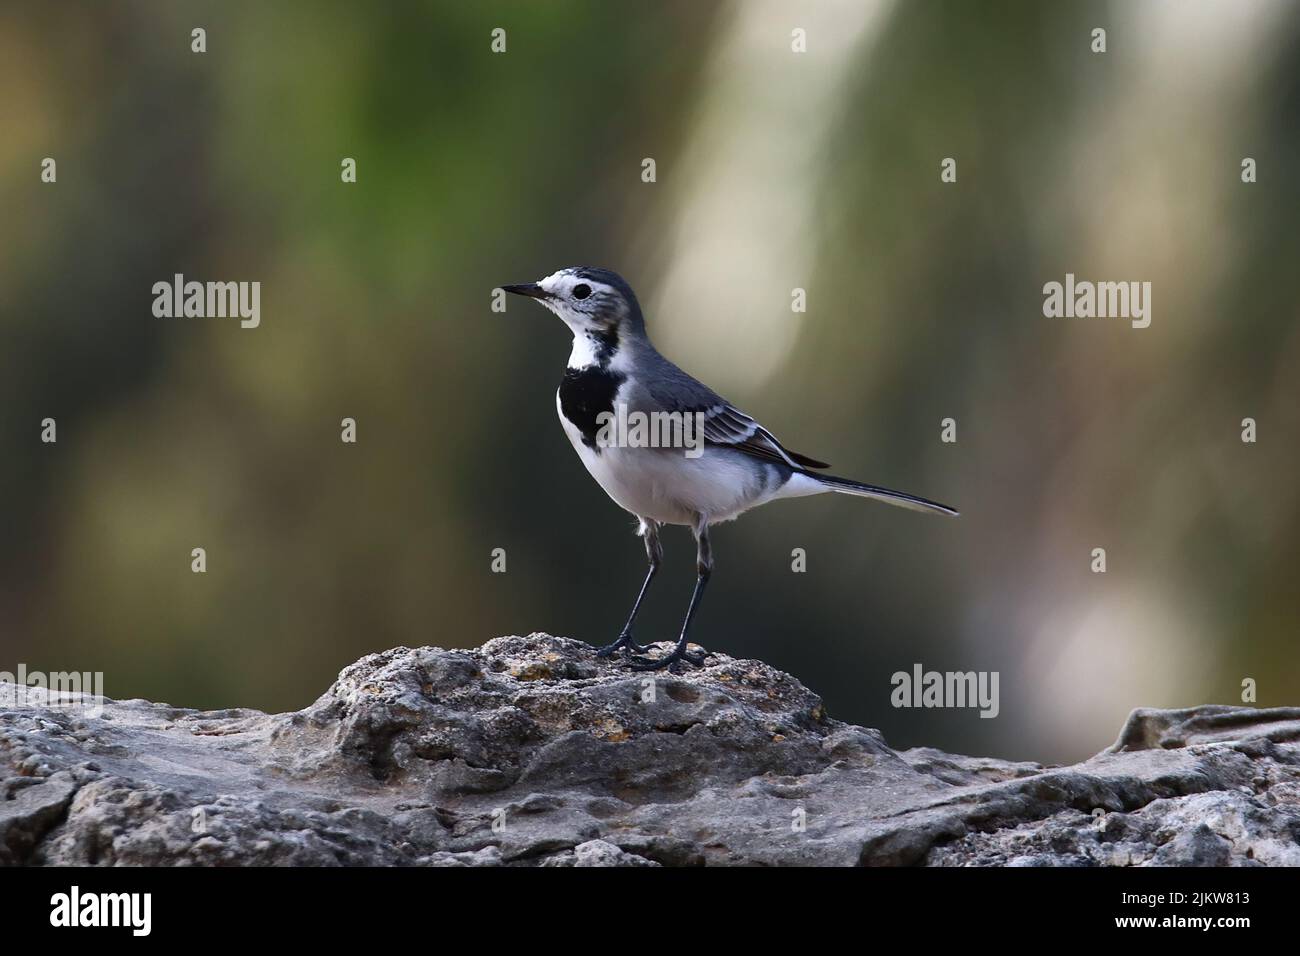 A lone wagtail on a rock surface against a blurred background Stock Photo